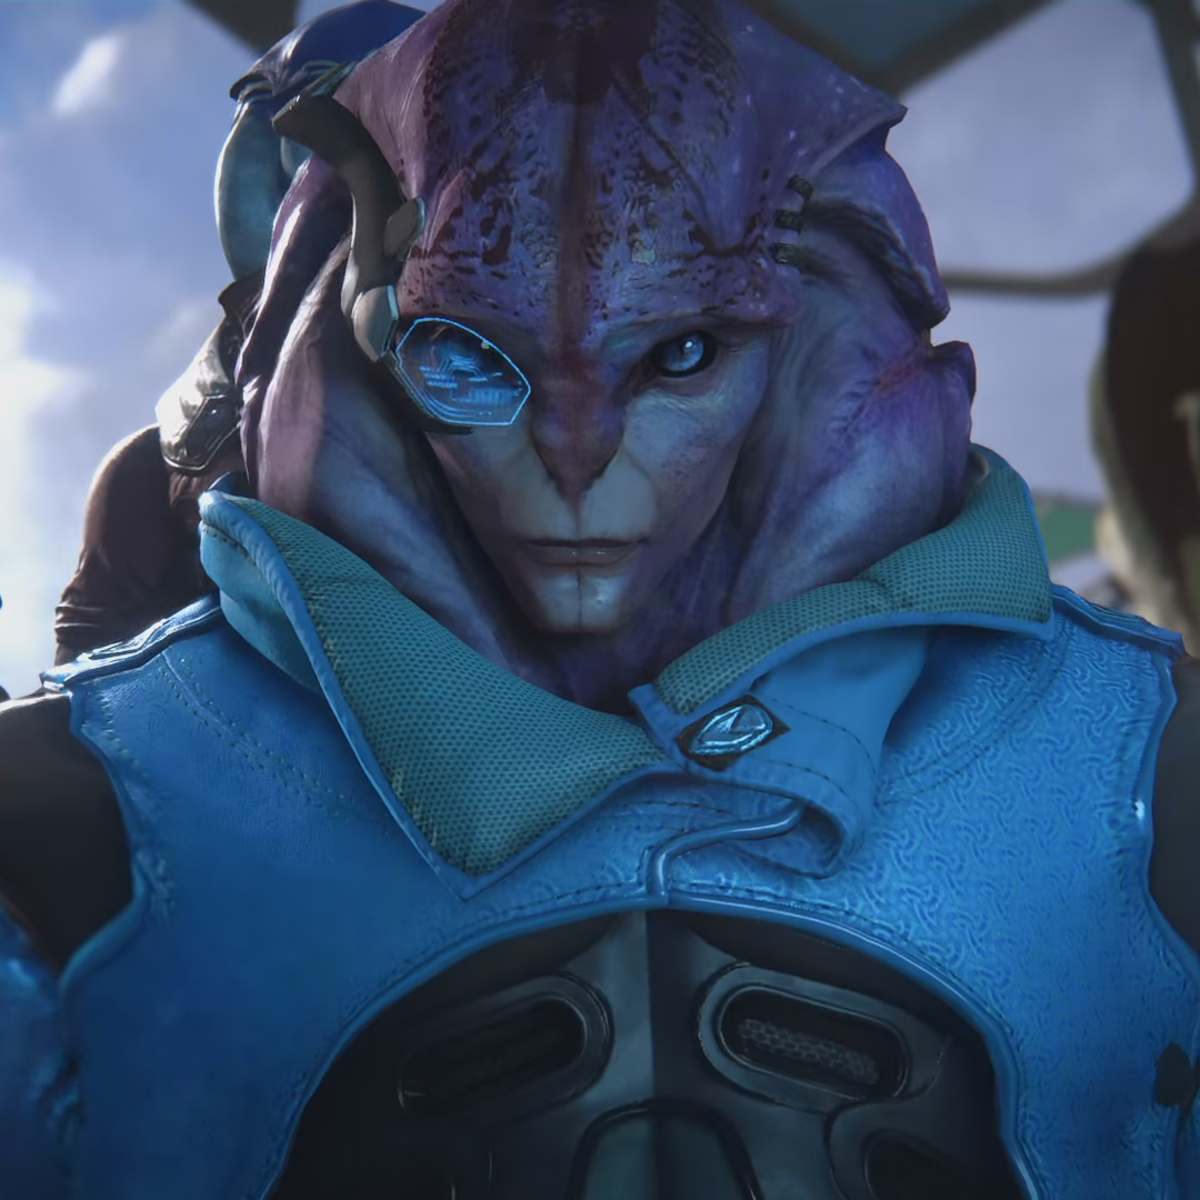 How to Romance Jaal in “Mass Effect: Andromeda”